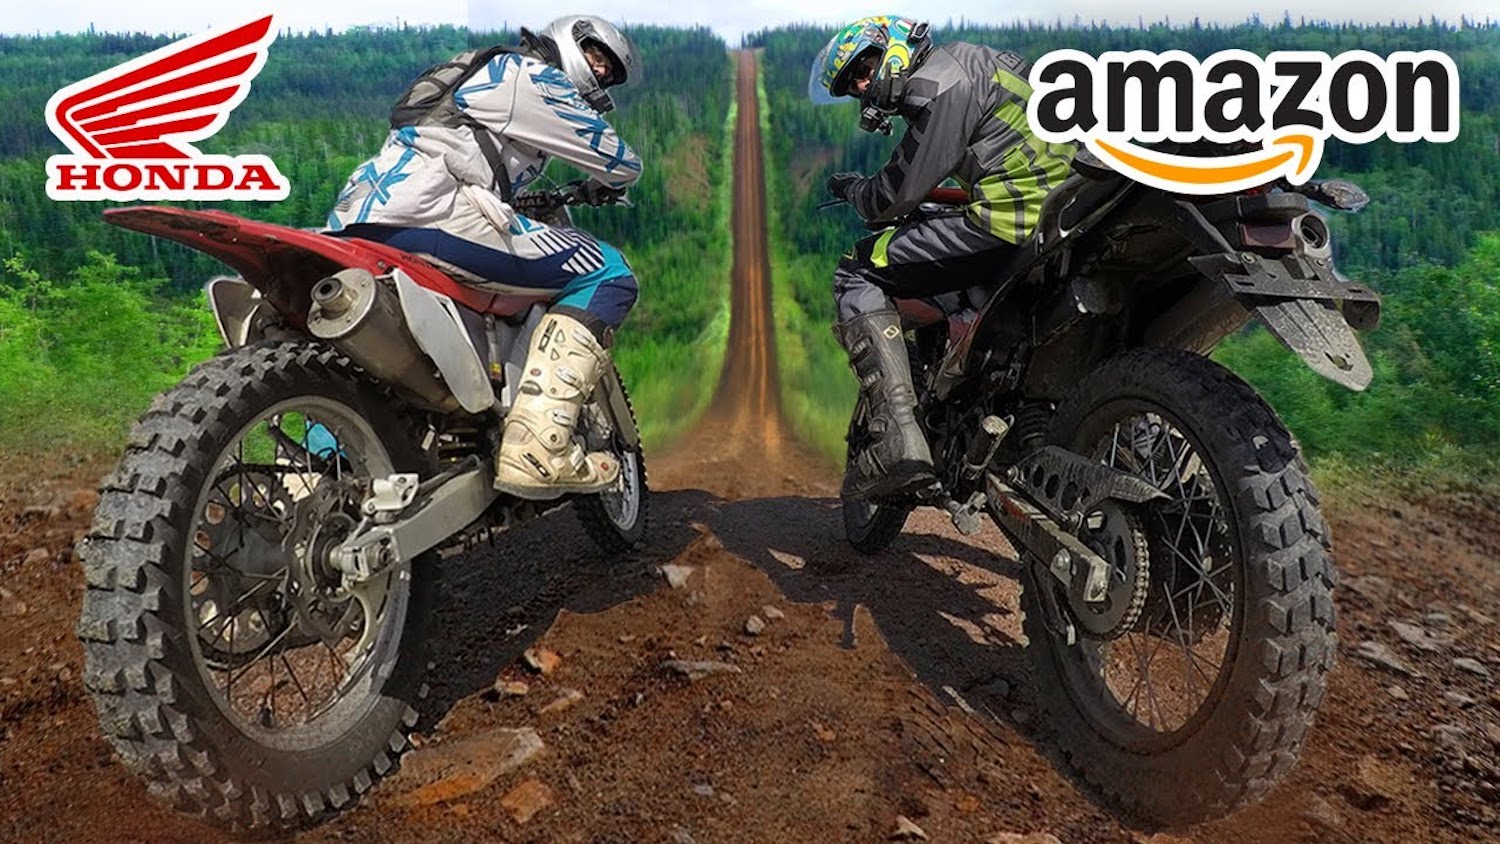 Bikes and Beards compare older Honda 250R to the brand-new Hawk 250 DLX from Amazon